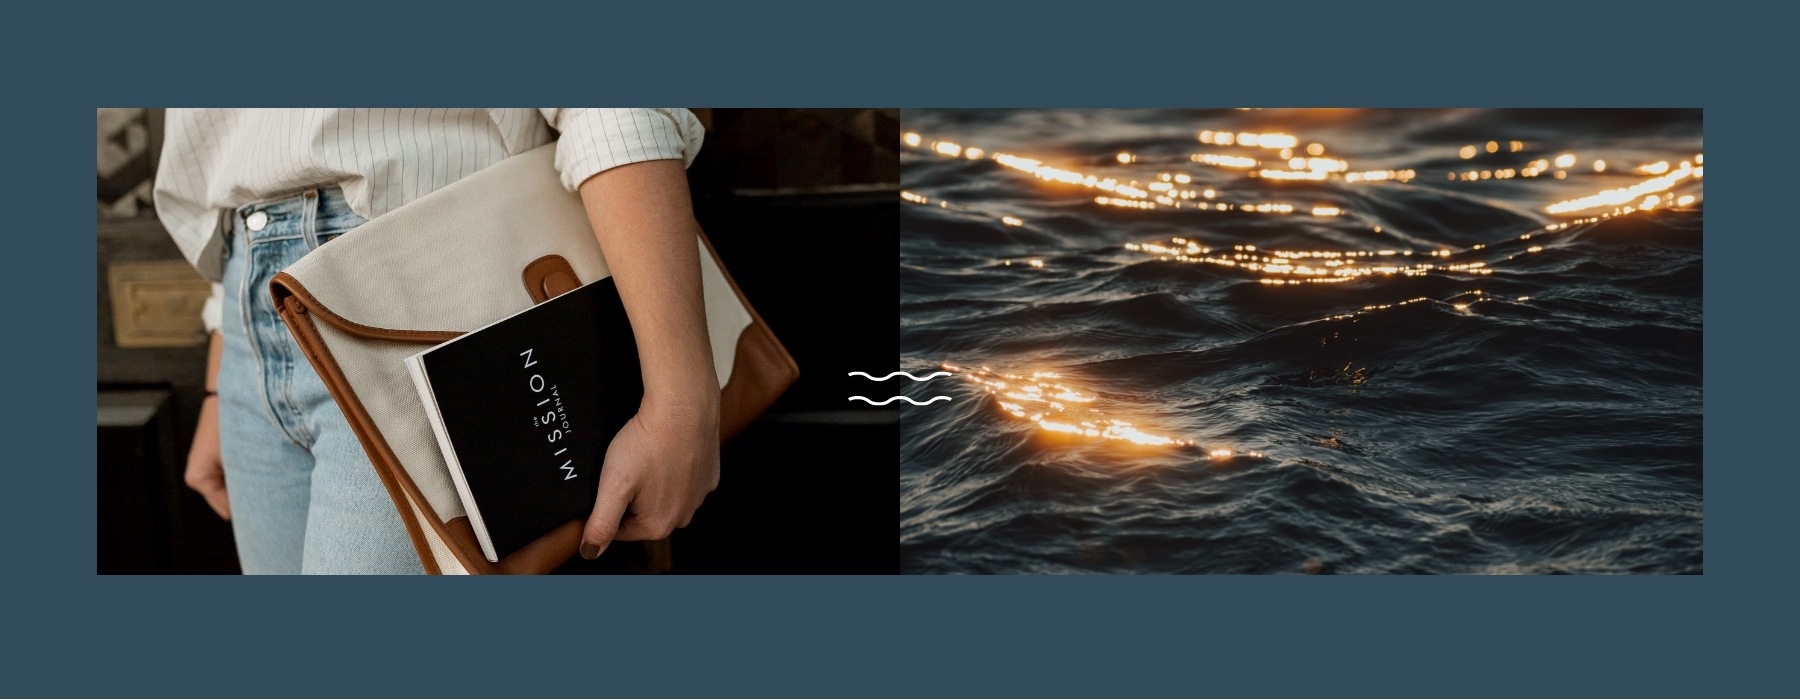 edited image showing a woman holding some books and light reflecting on deep waves